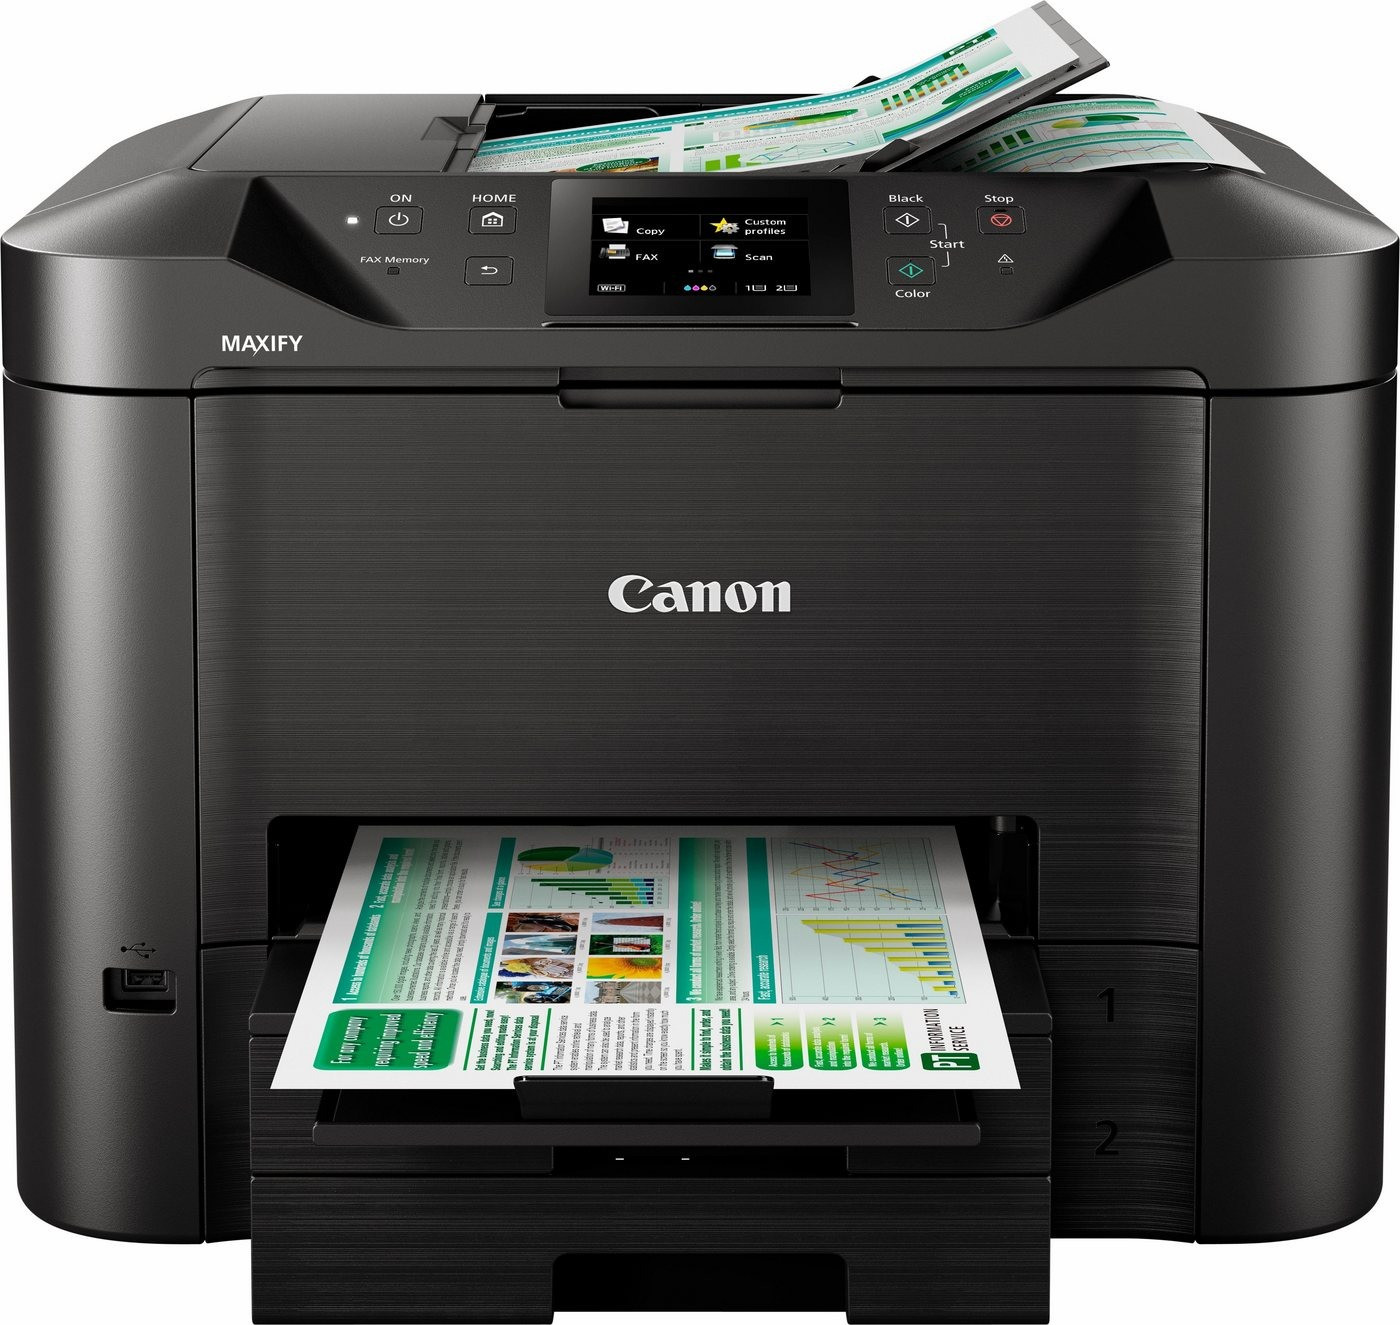 Canon £159.97 from MAXIFY MB5450 Deals Best – on (Today) Buy